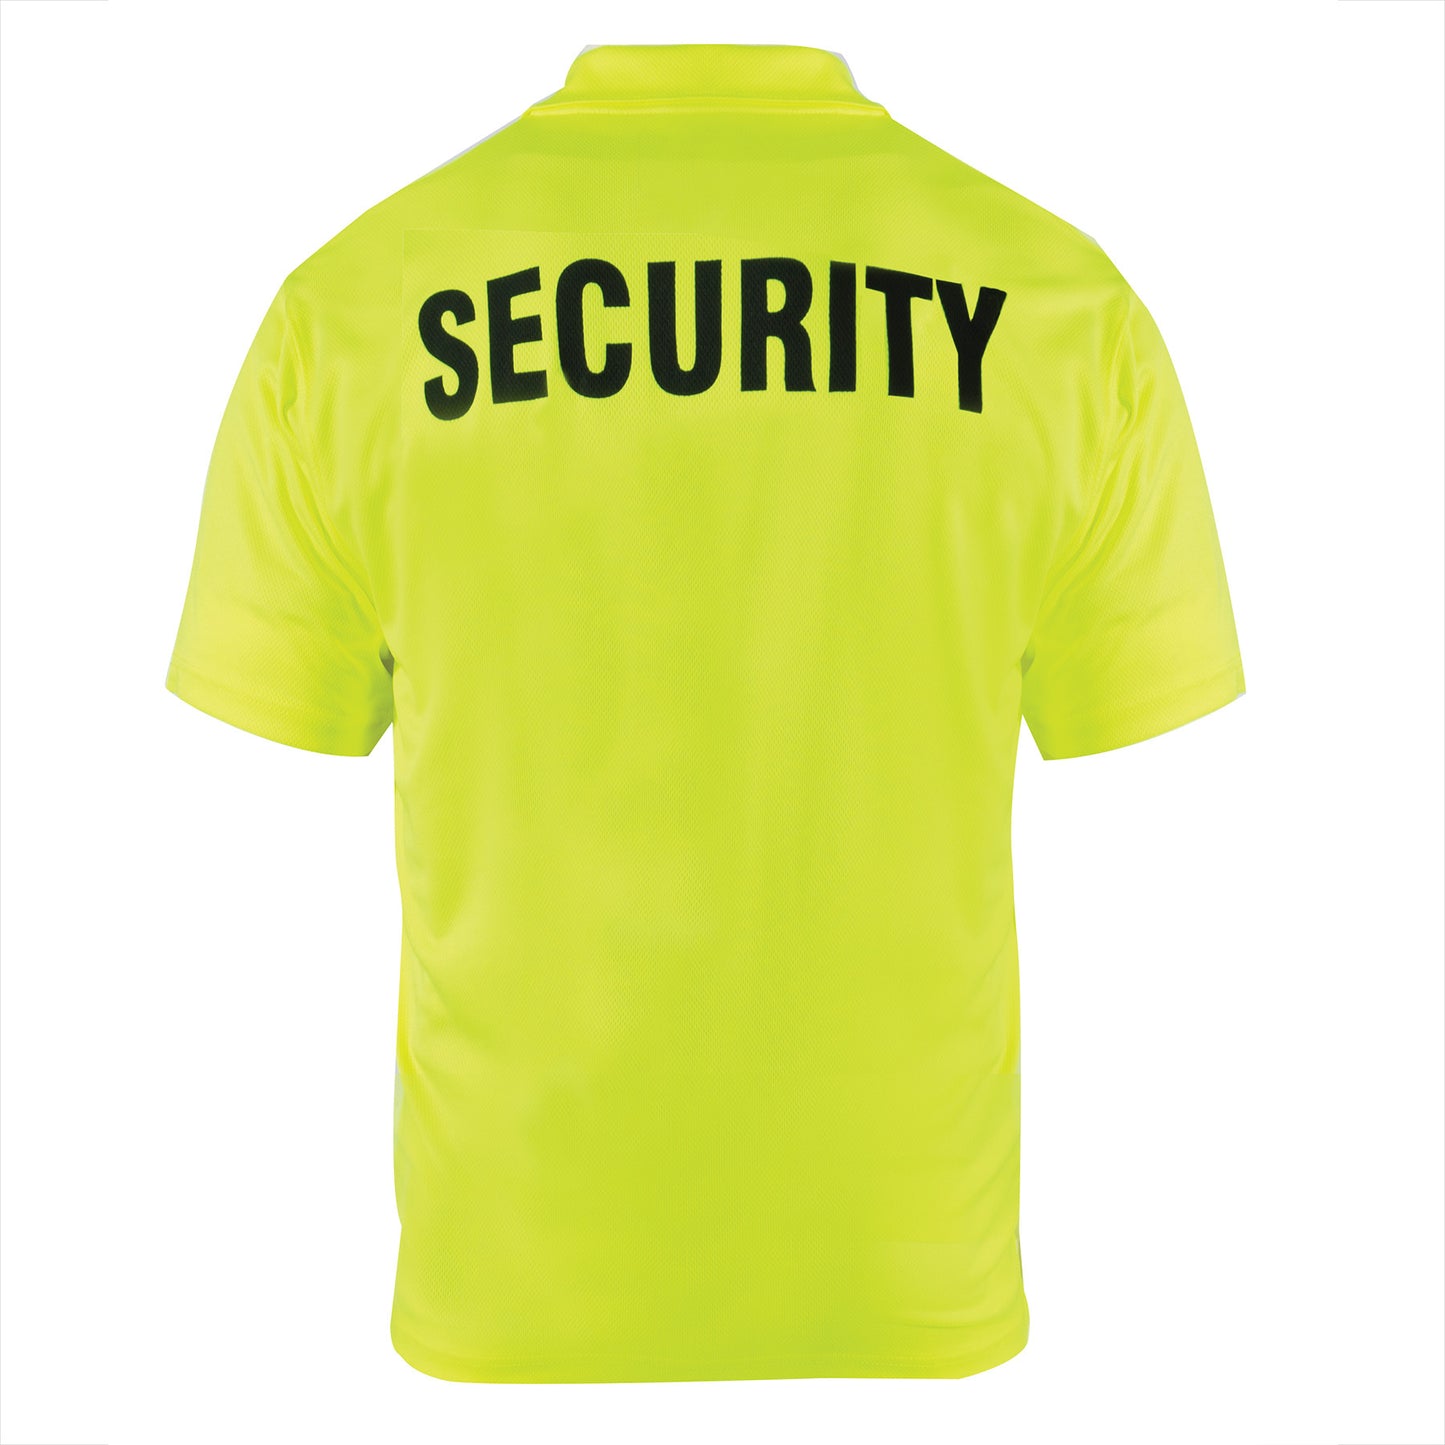 Men's Moisture Wicking Security Polo Shirt Midnight Navy or Safety Green